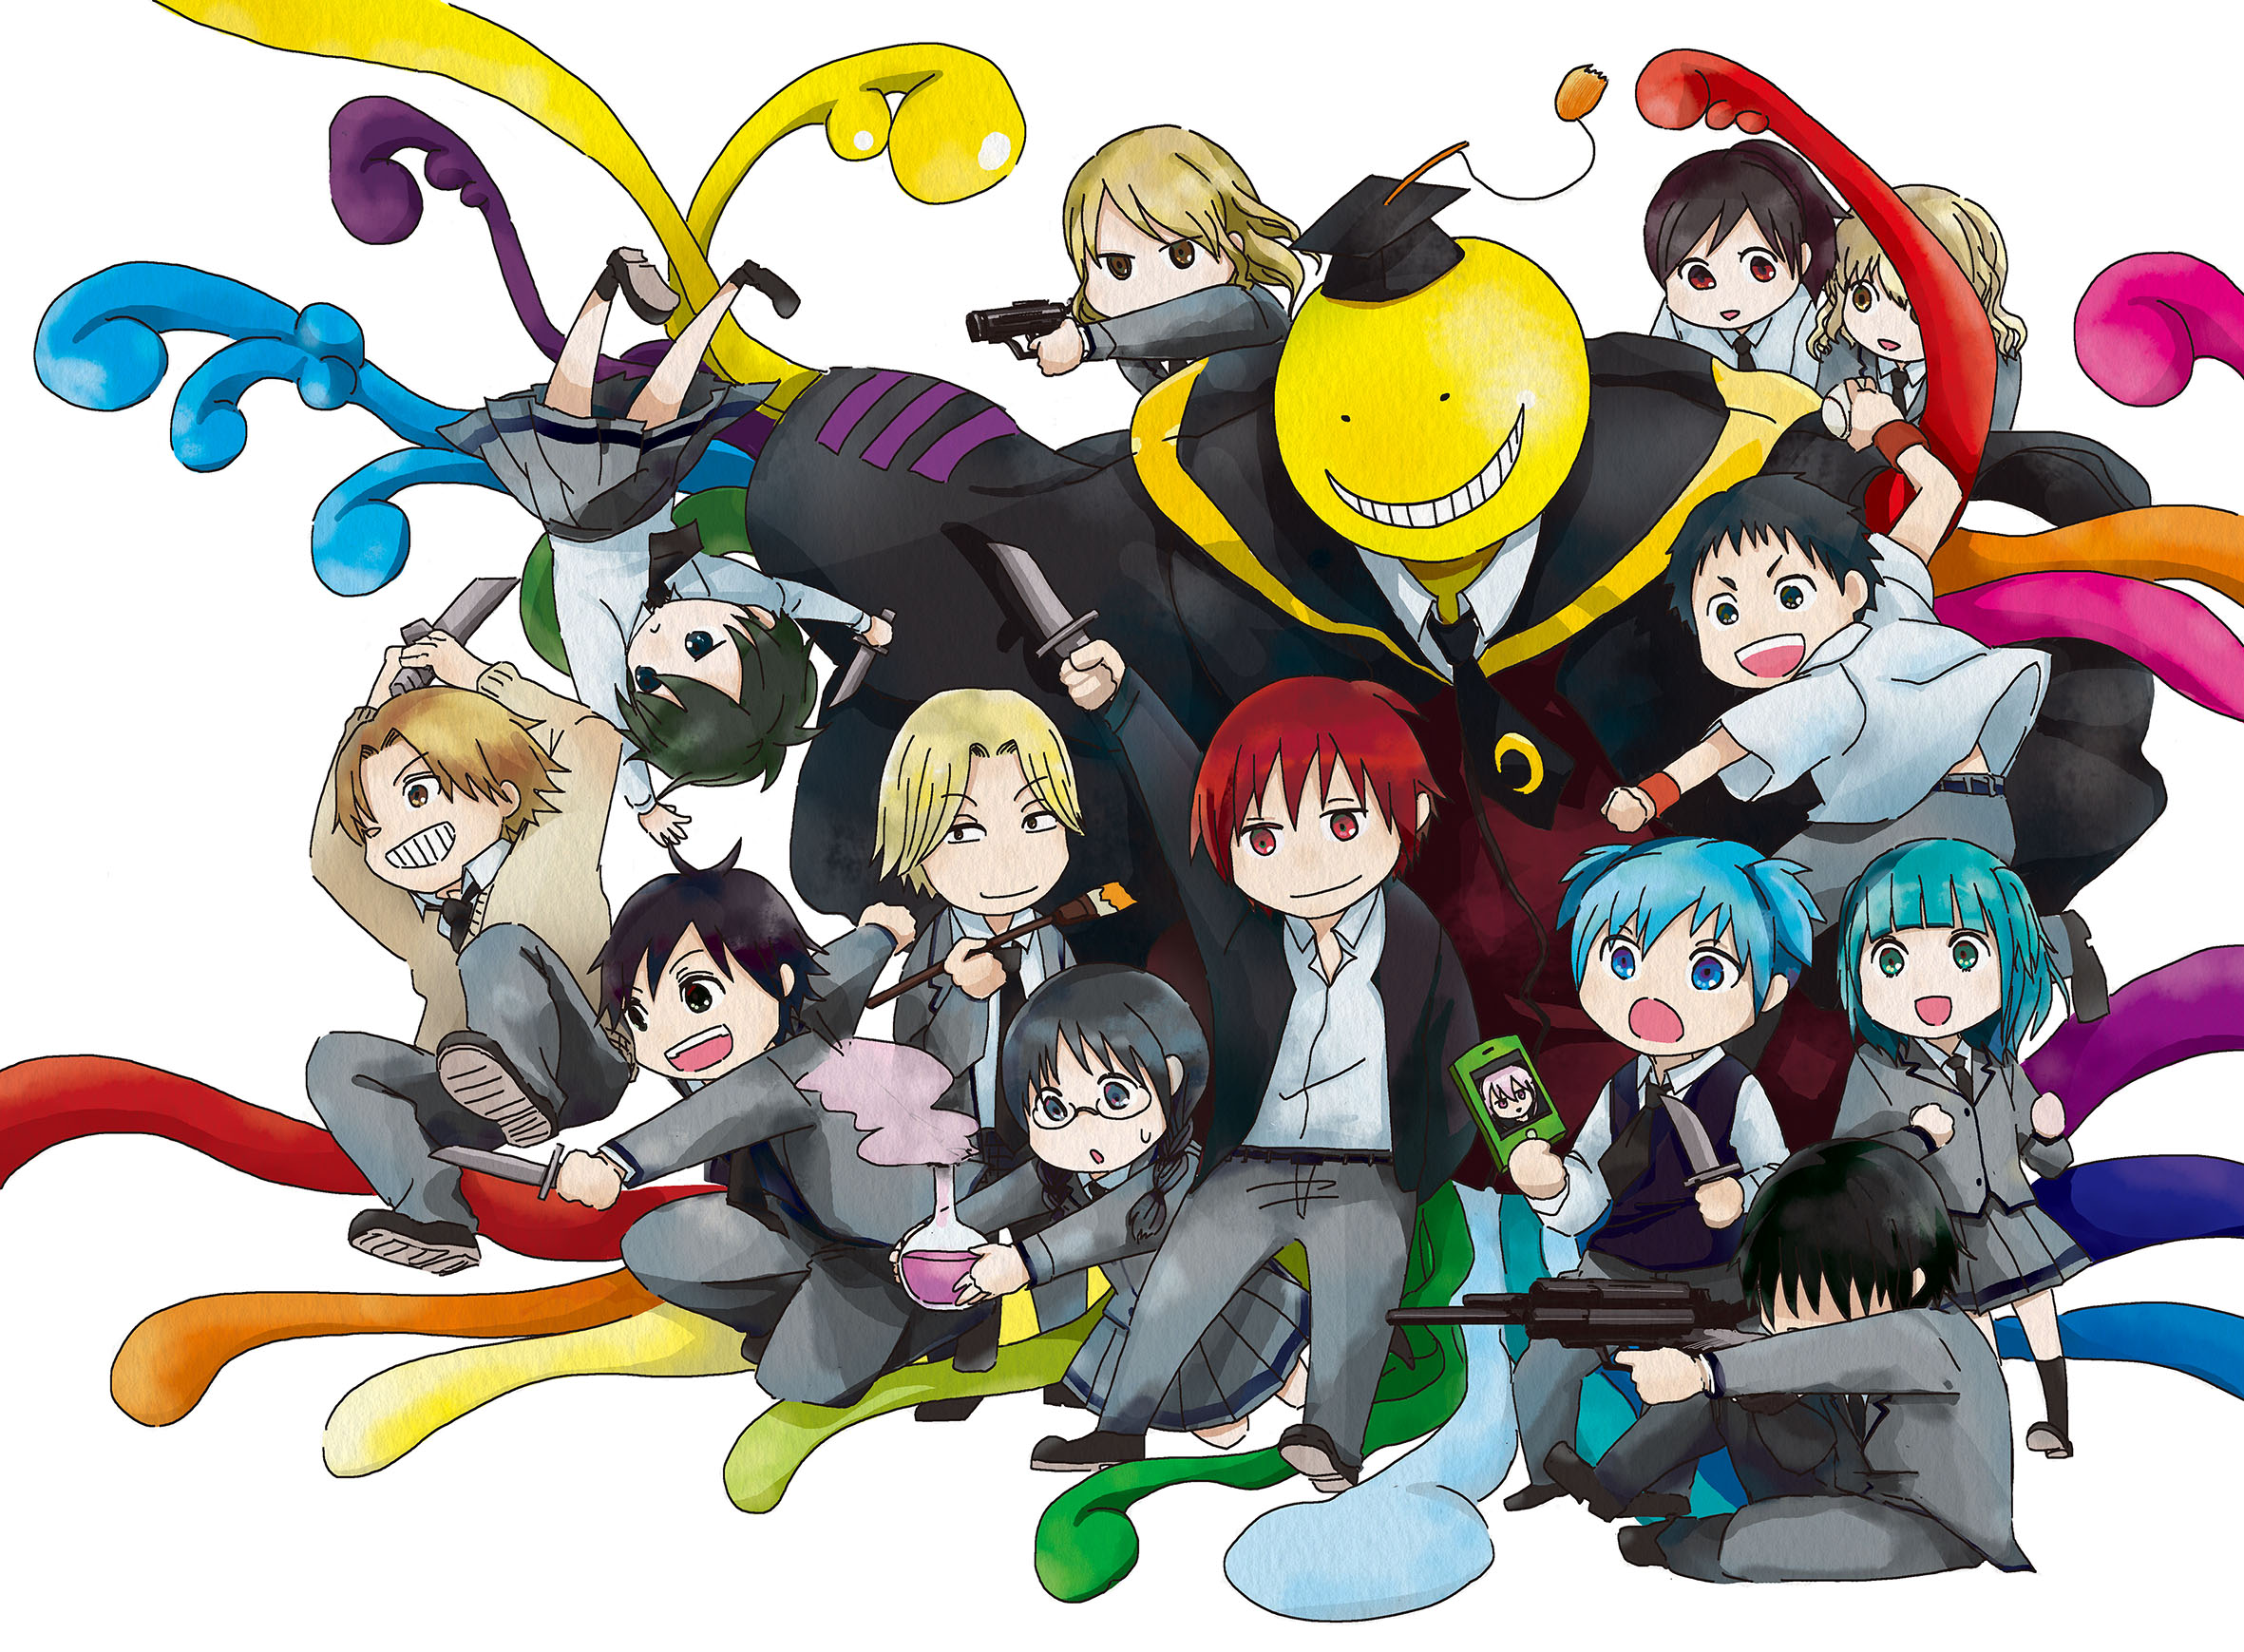 Amazing Assassination Classroom Pictures & Backgrounds